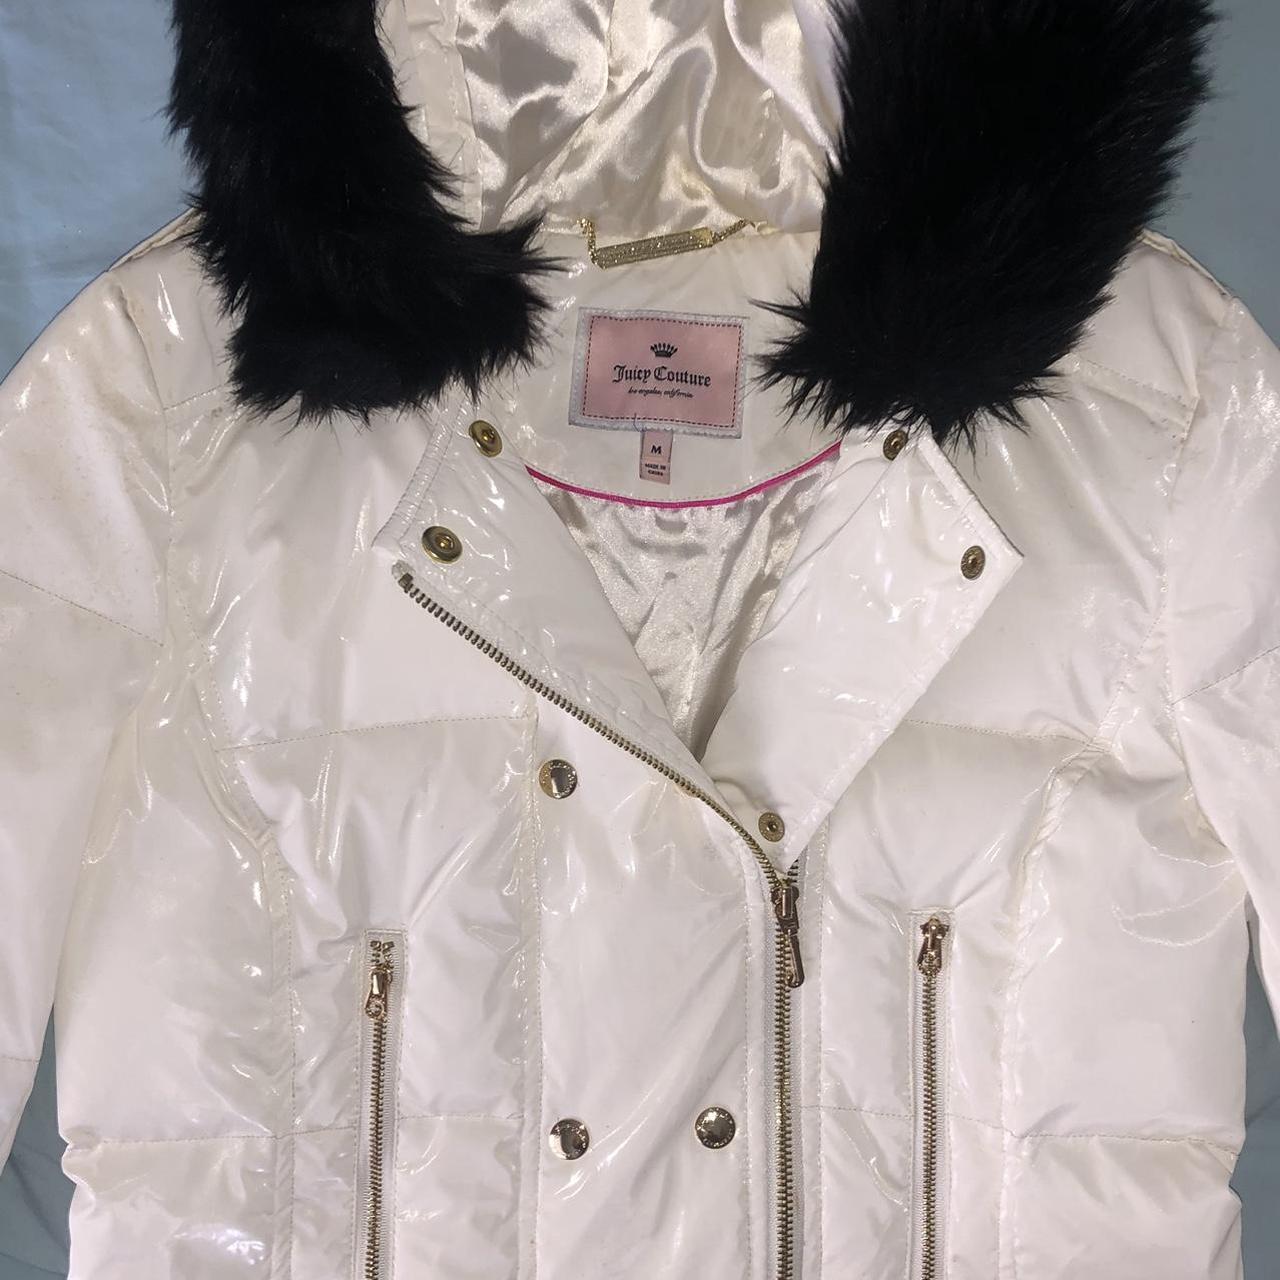 Juicy Couture Women's White and Gold Coat | Depop